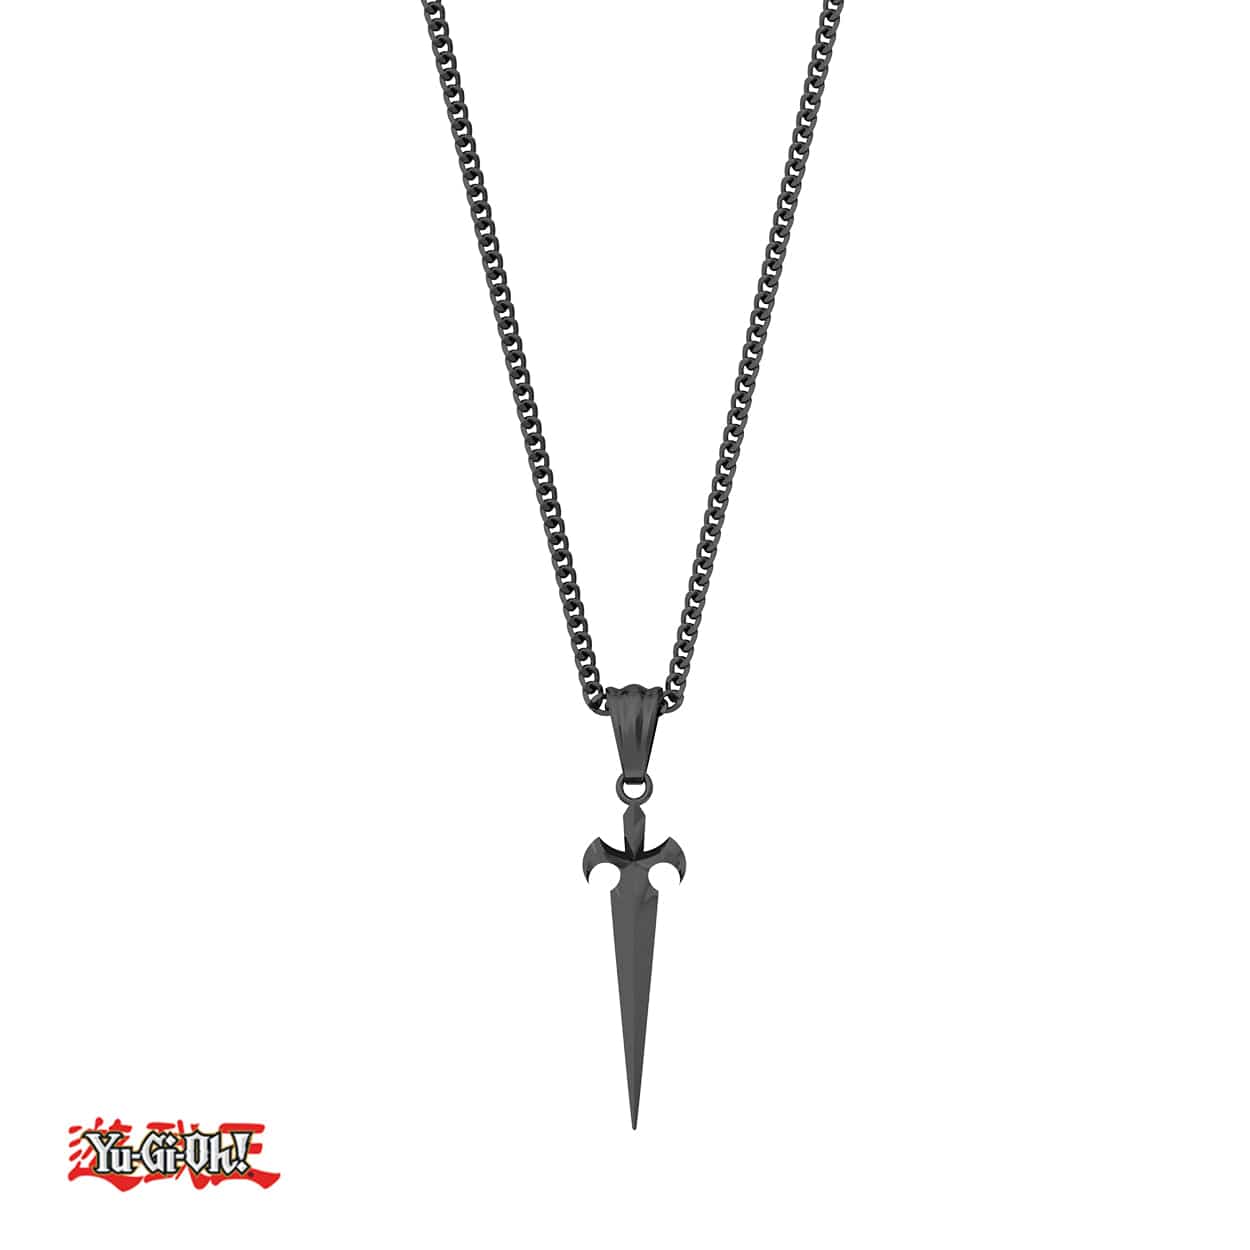 Yu-Gi-Oh!™ Sword Of Concealing Light Necklace